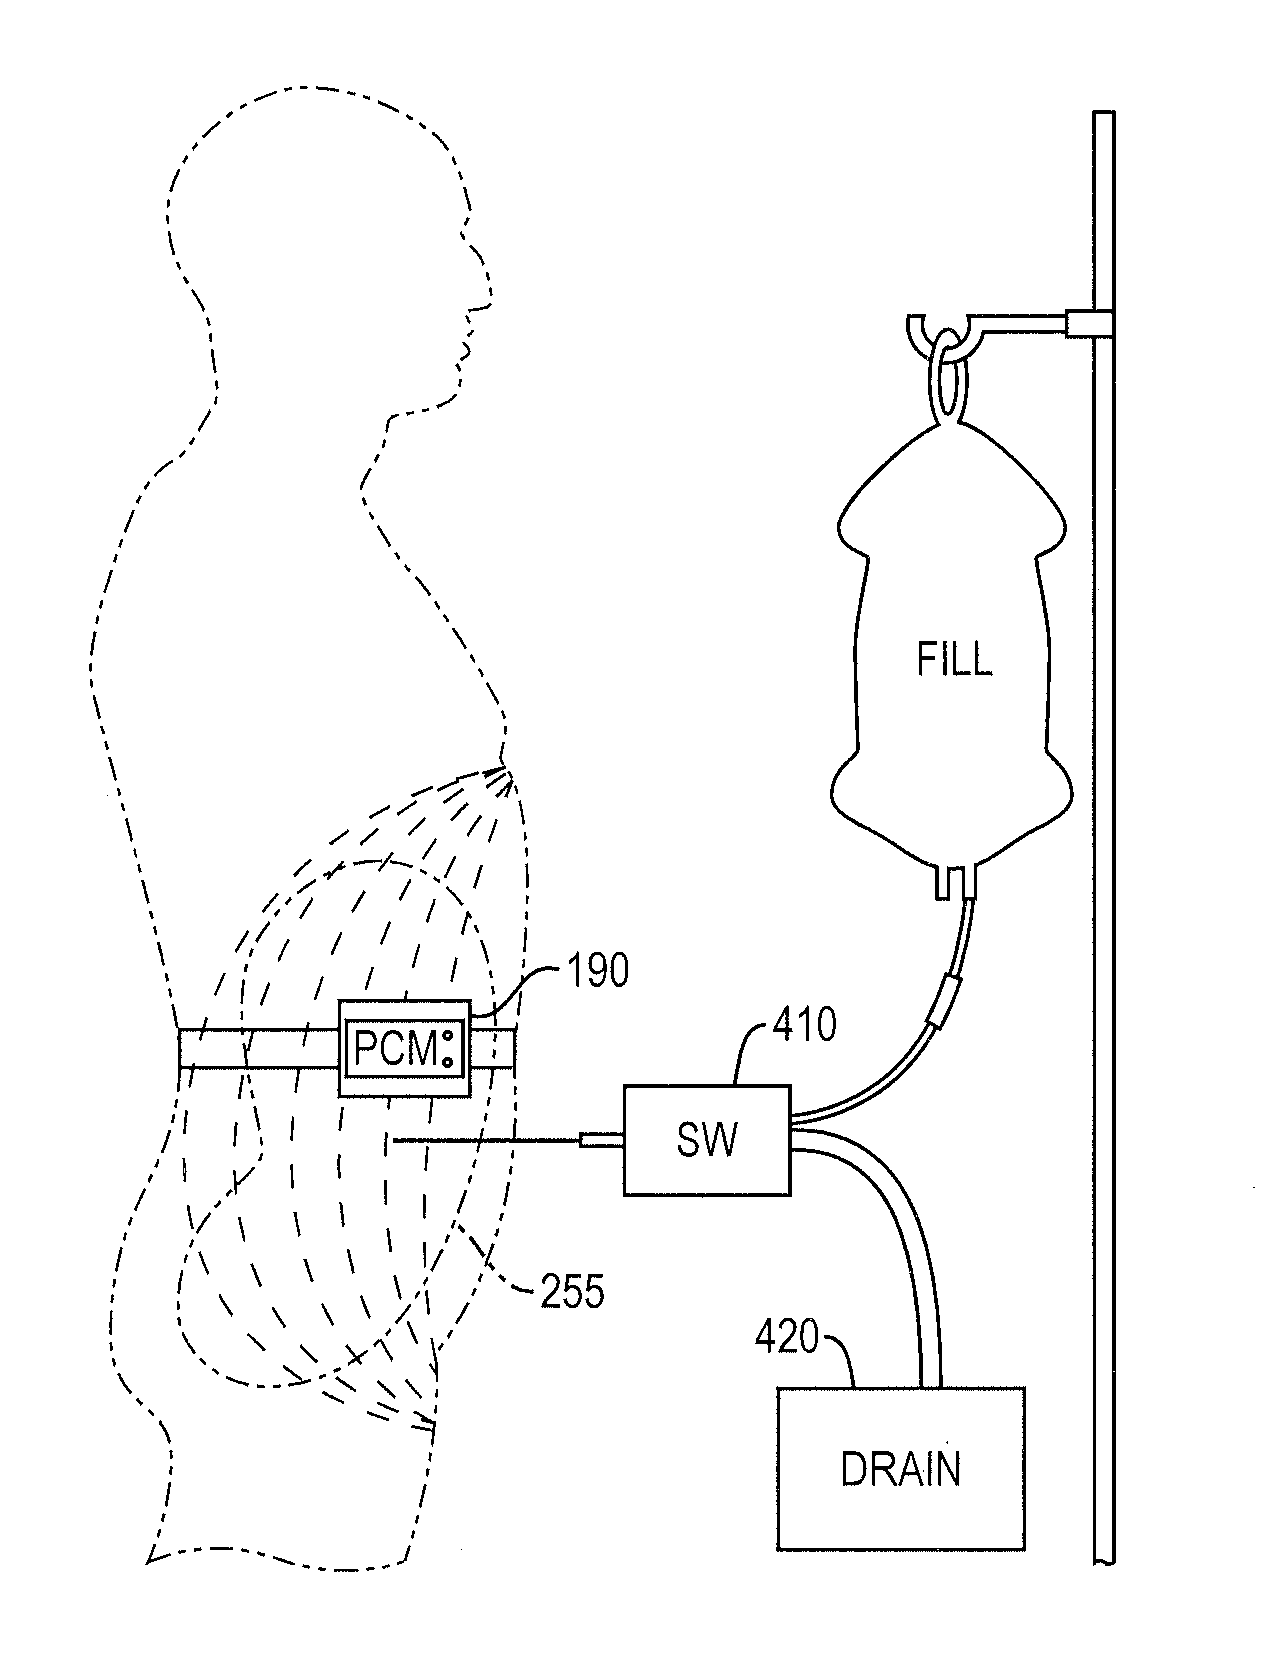 System and method of monitoring and control of ultrafiltration volume during peritoneal dialysis using segmental bioimpedance